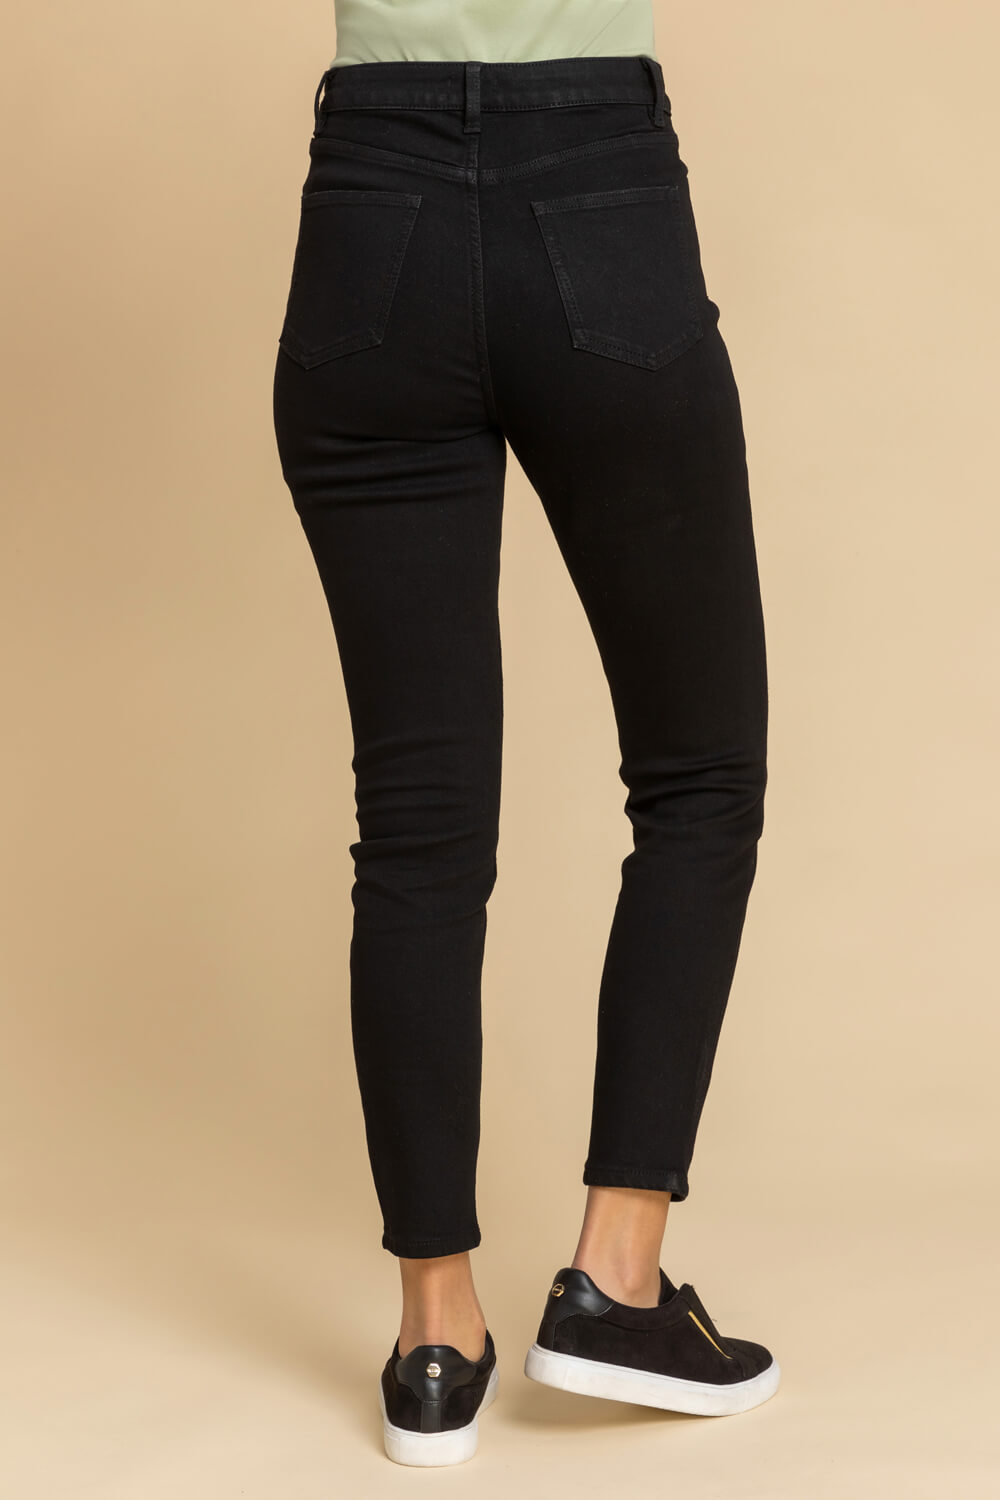 Black Ripped Stretch Skinny Jeans, Image 2 of 4